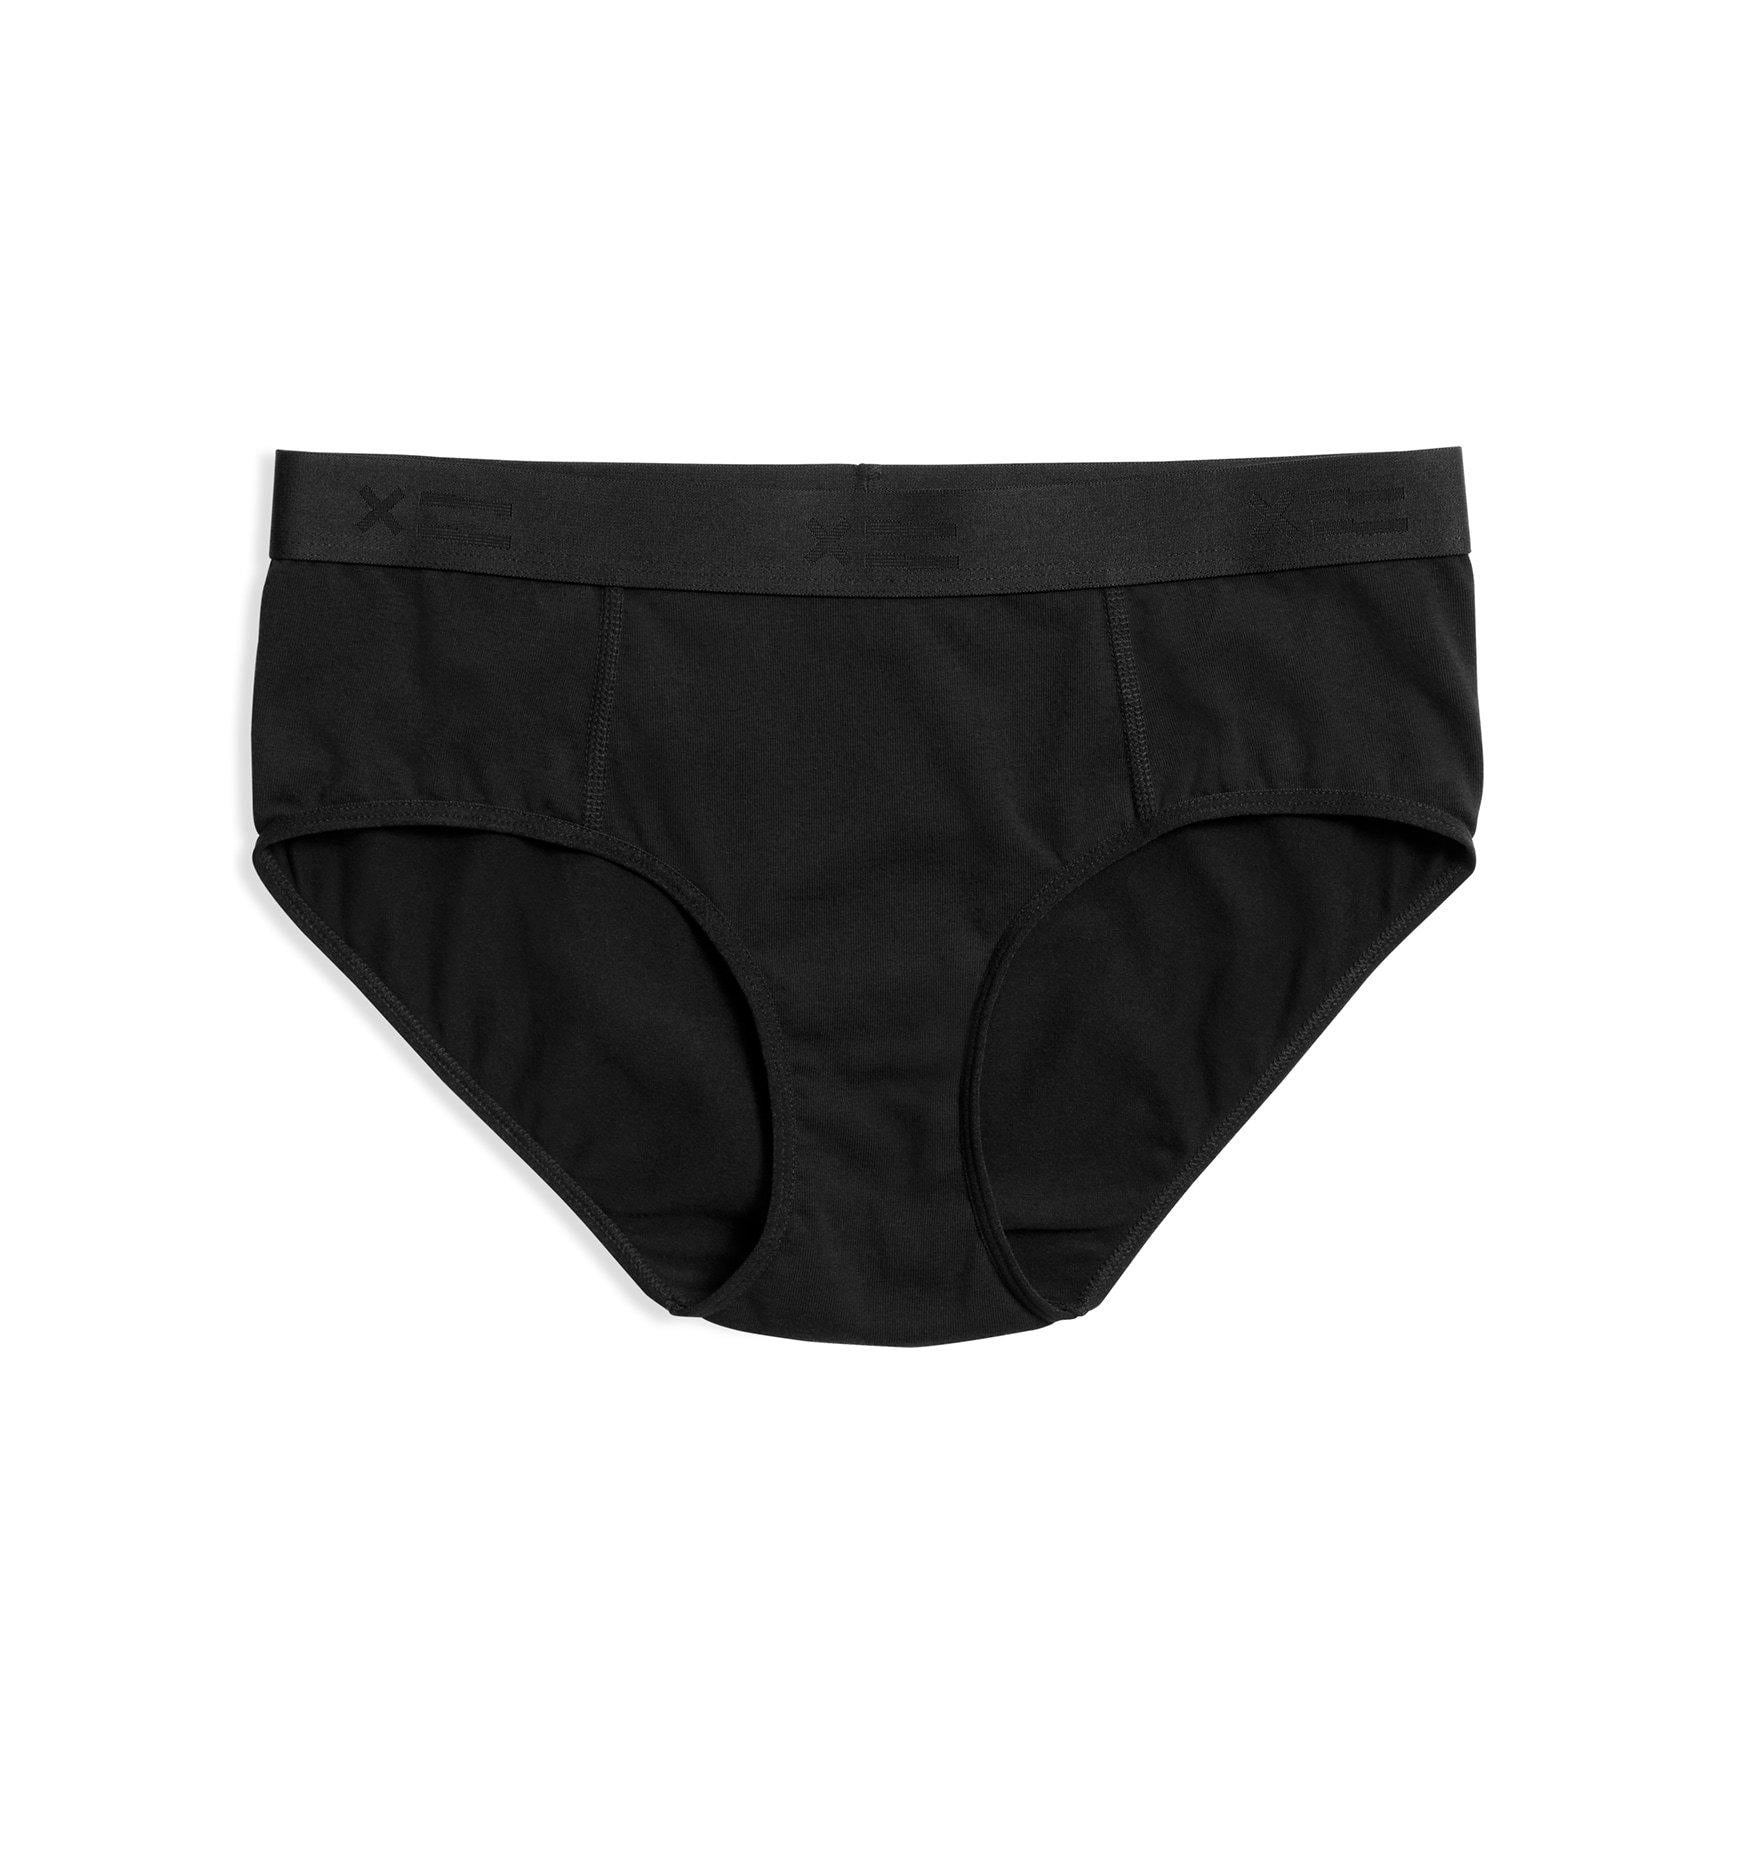 Hipster Underwear: Hip Huggers for Any Body